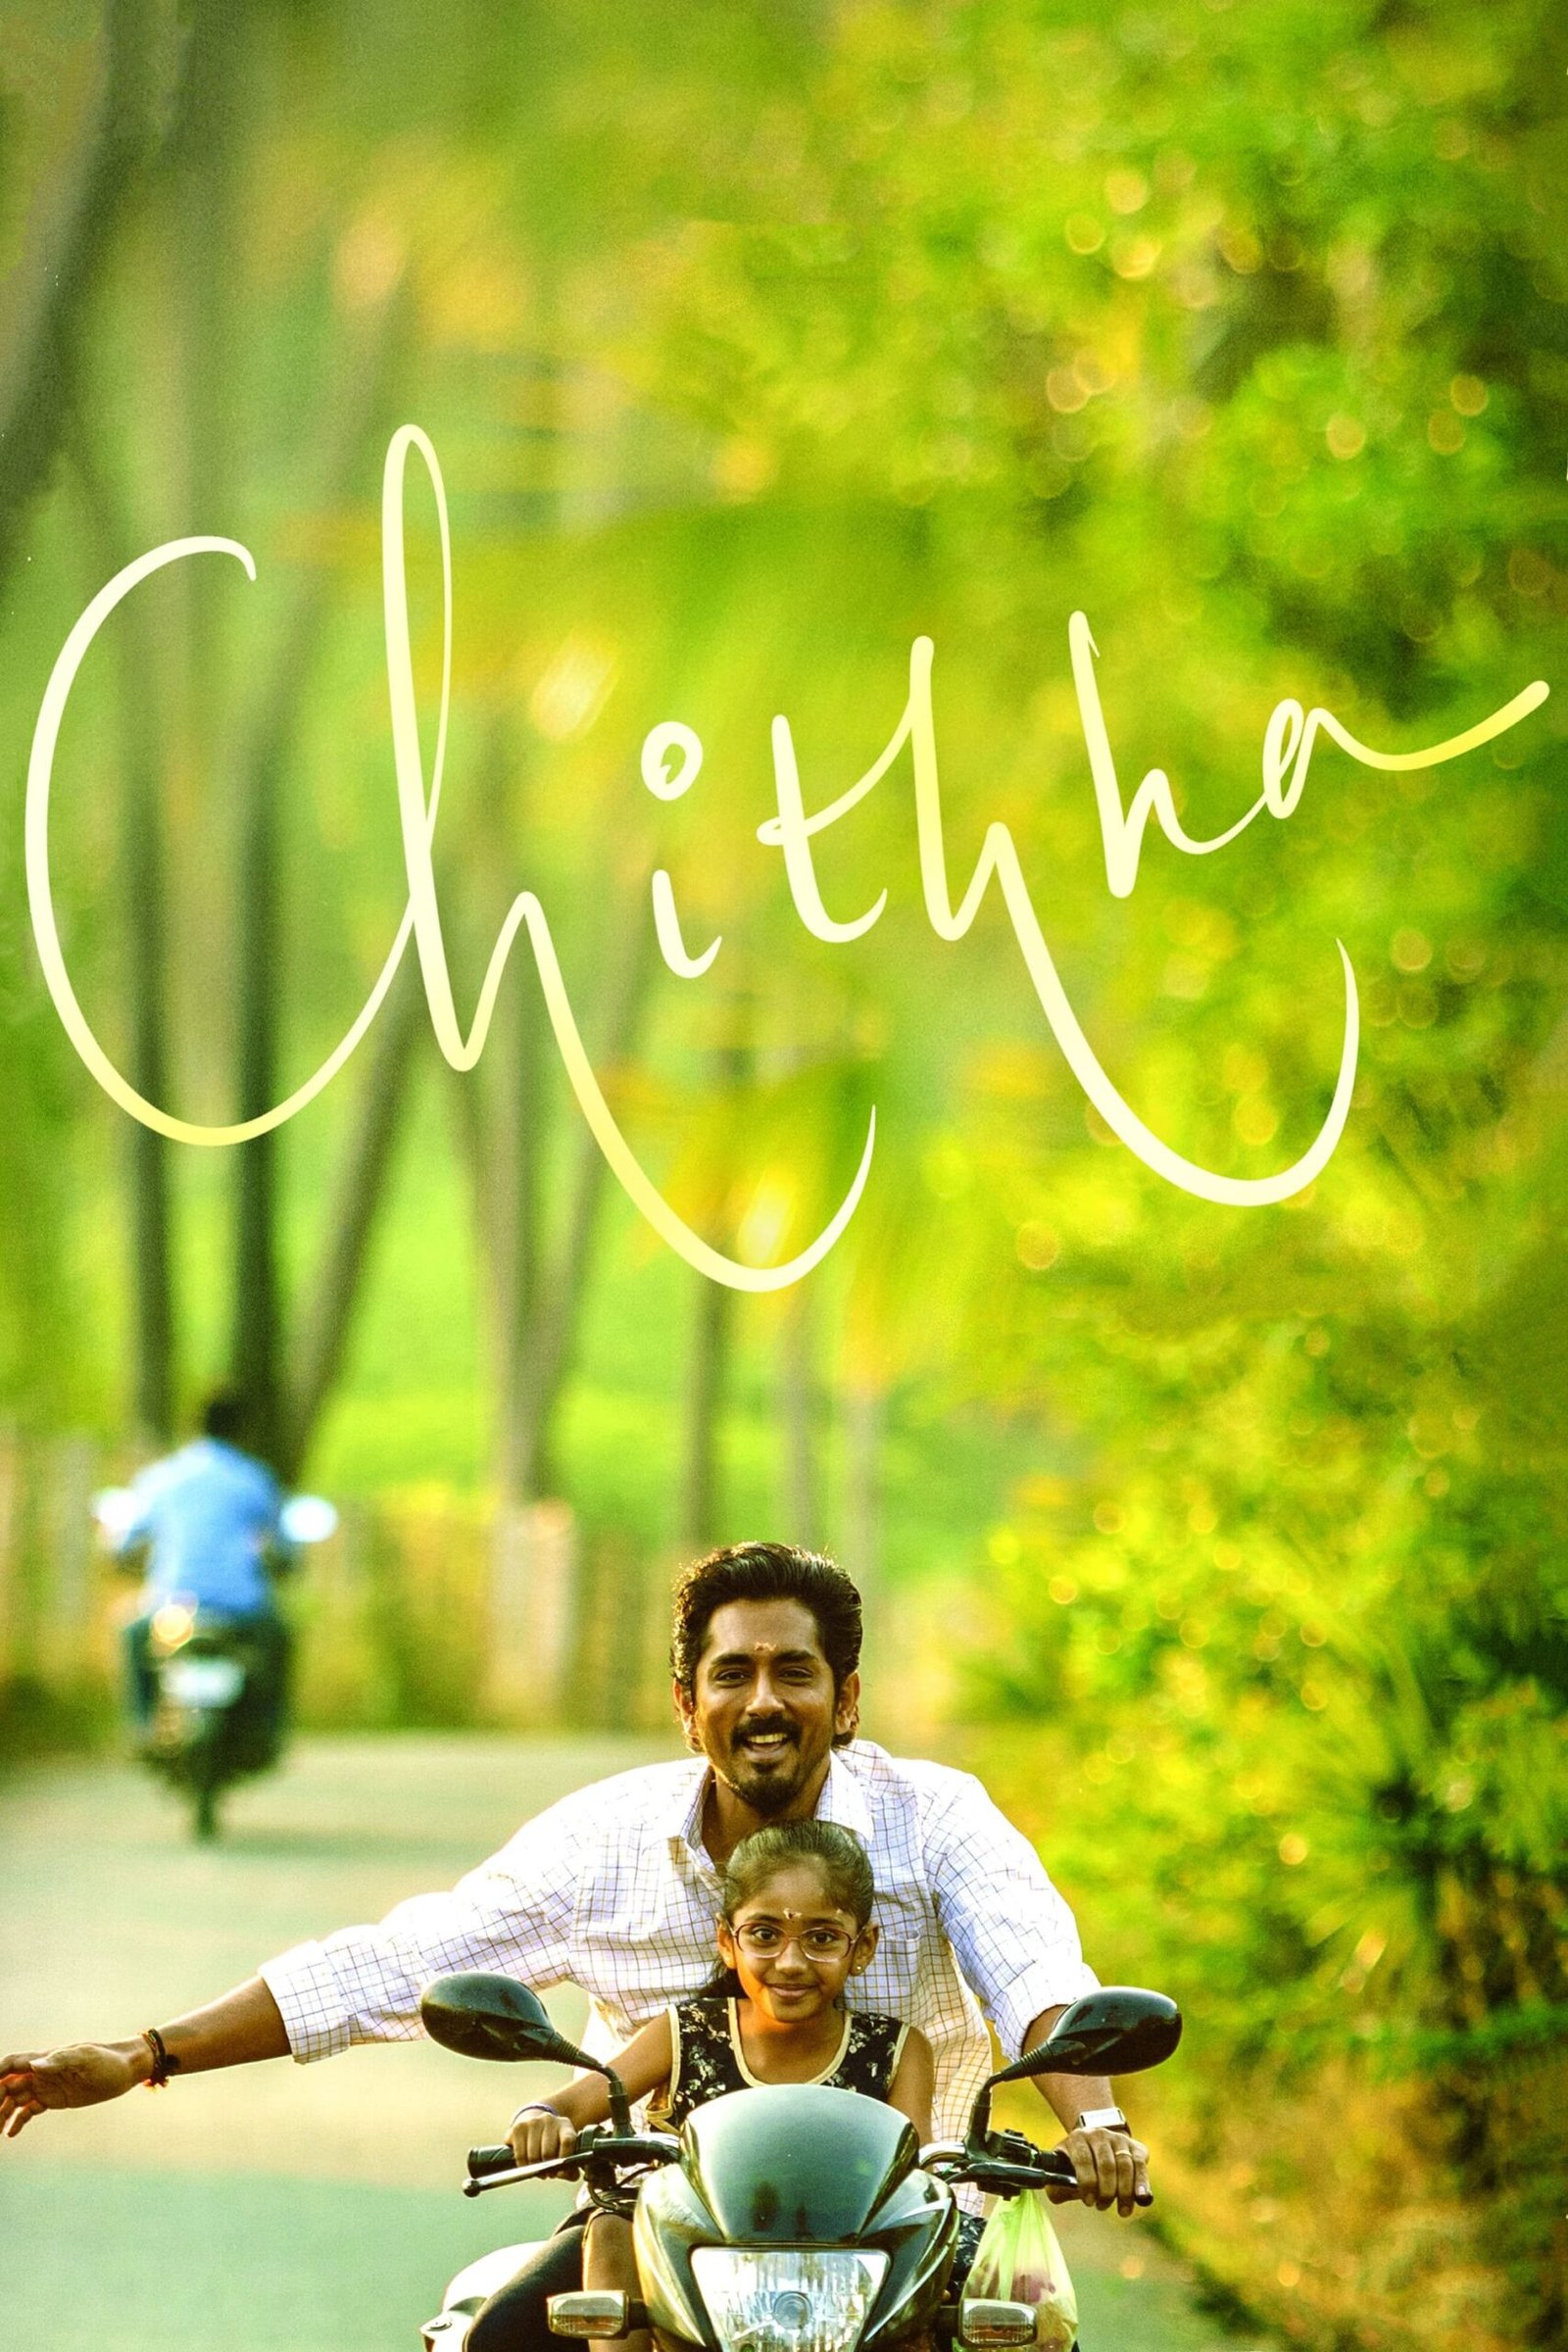 Poster for the movie "Chithha"